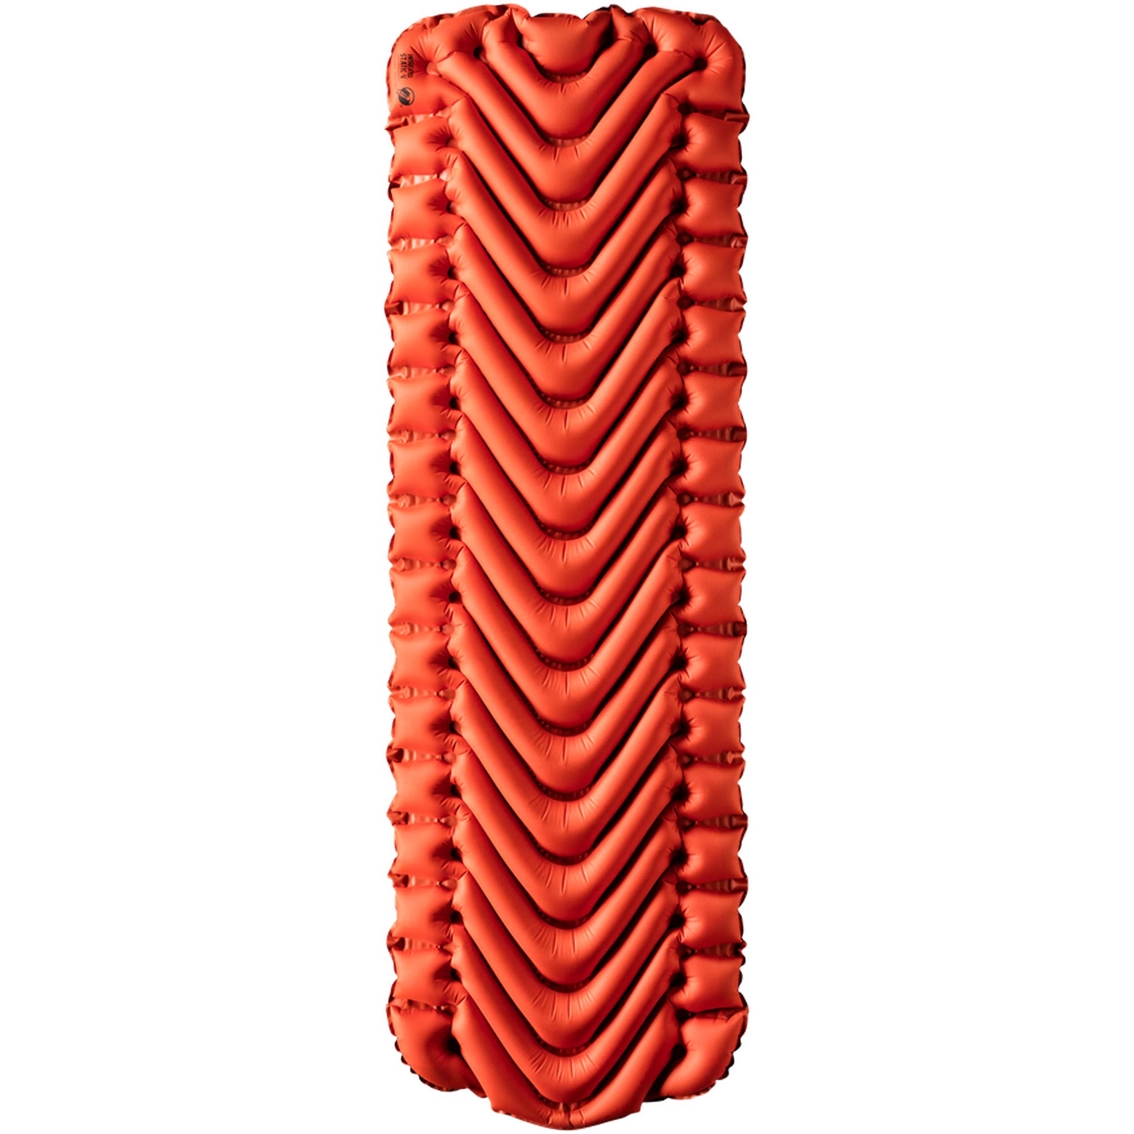 Klymit Insulated Static V Sleeping Pad - Image 3 of 10